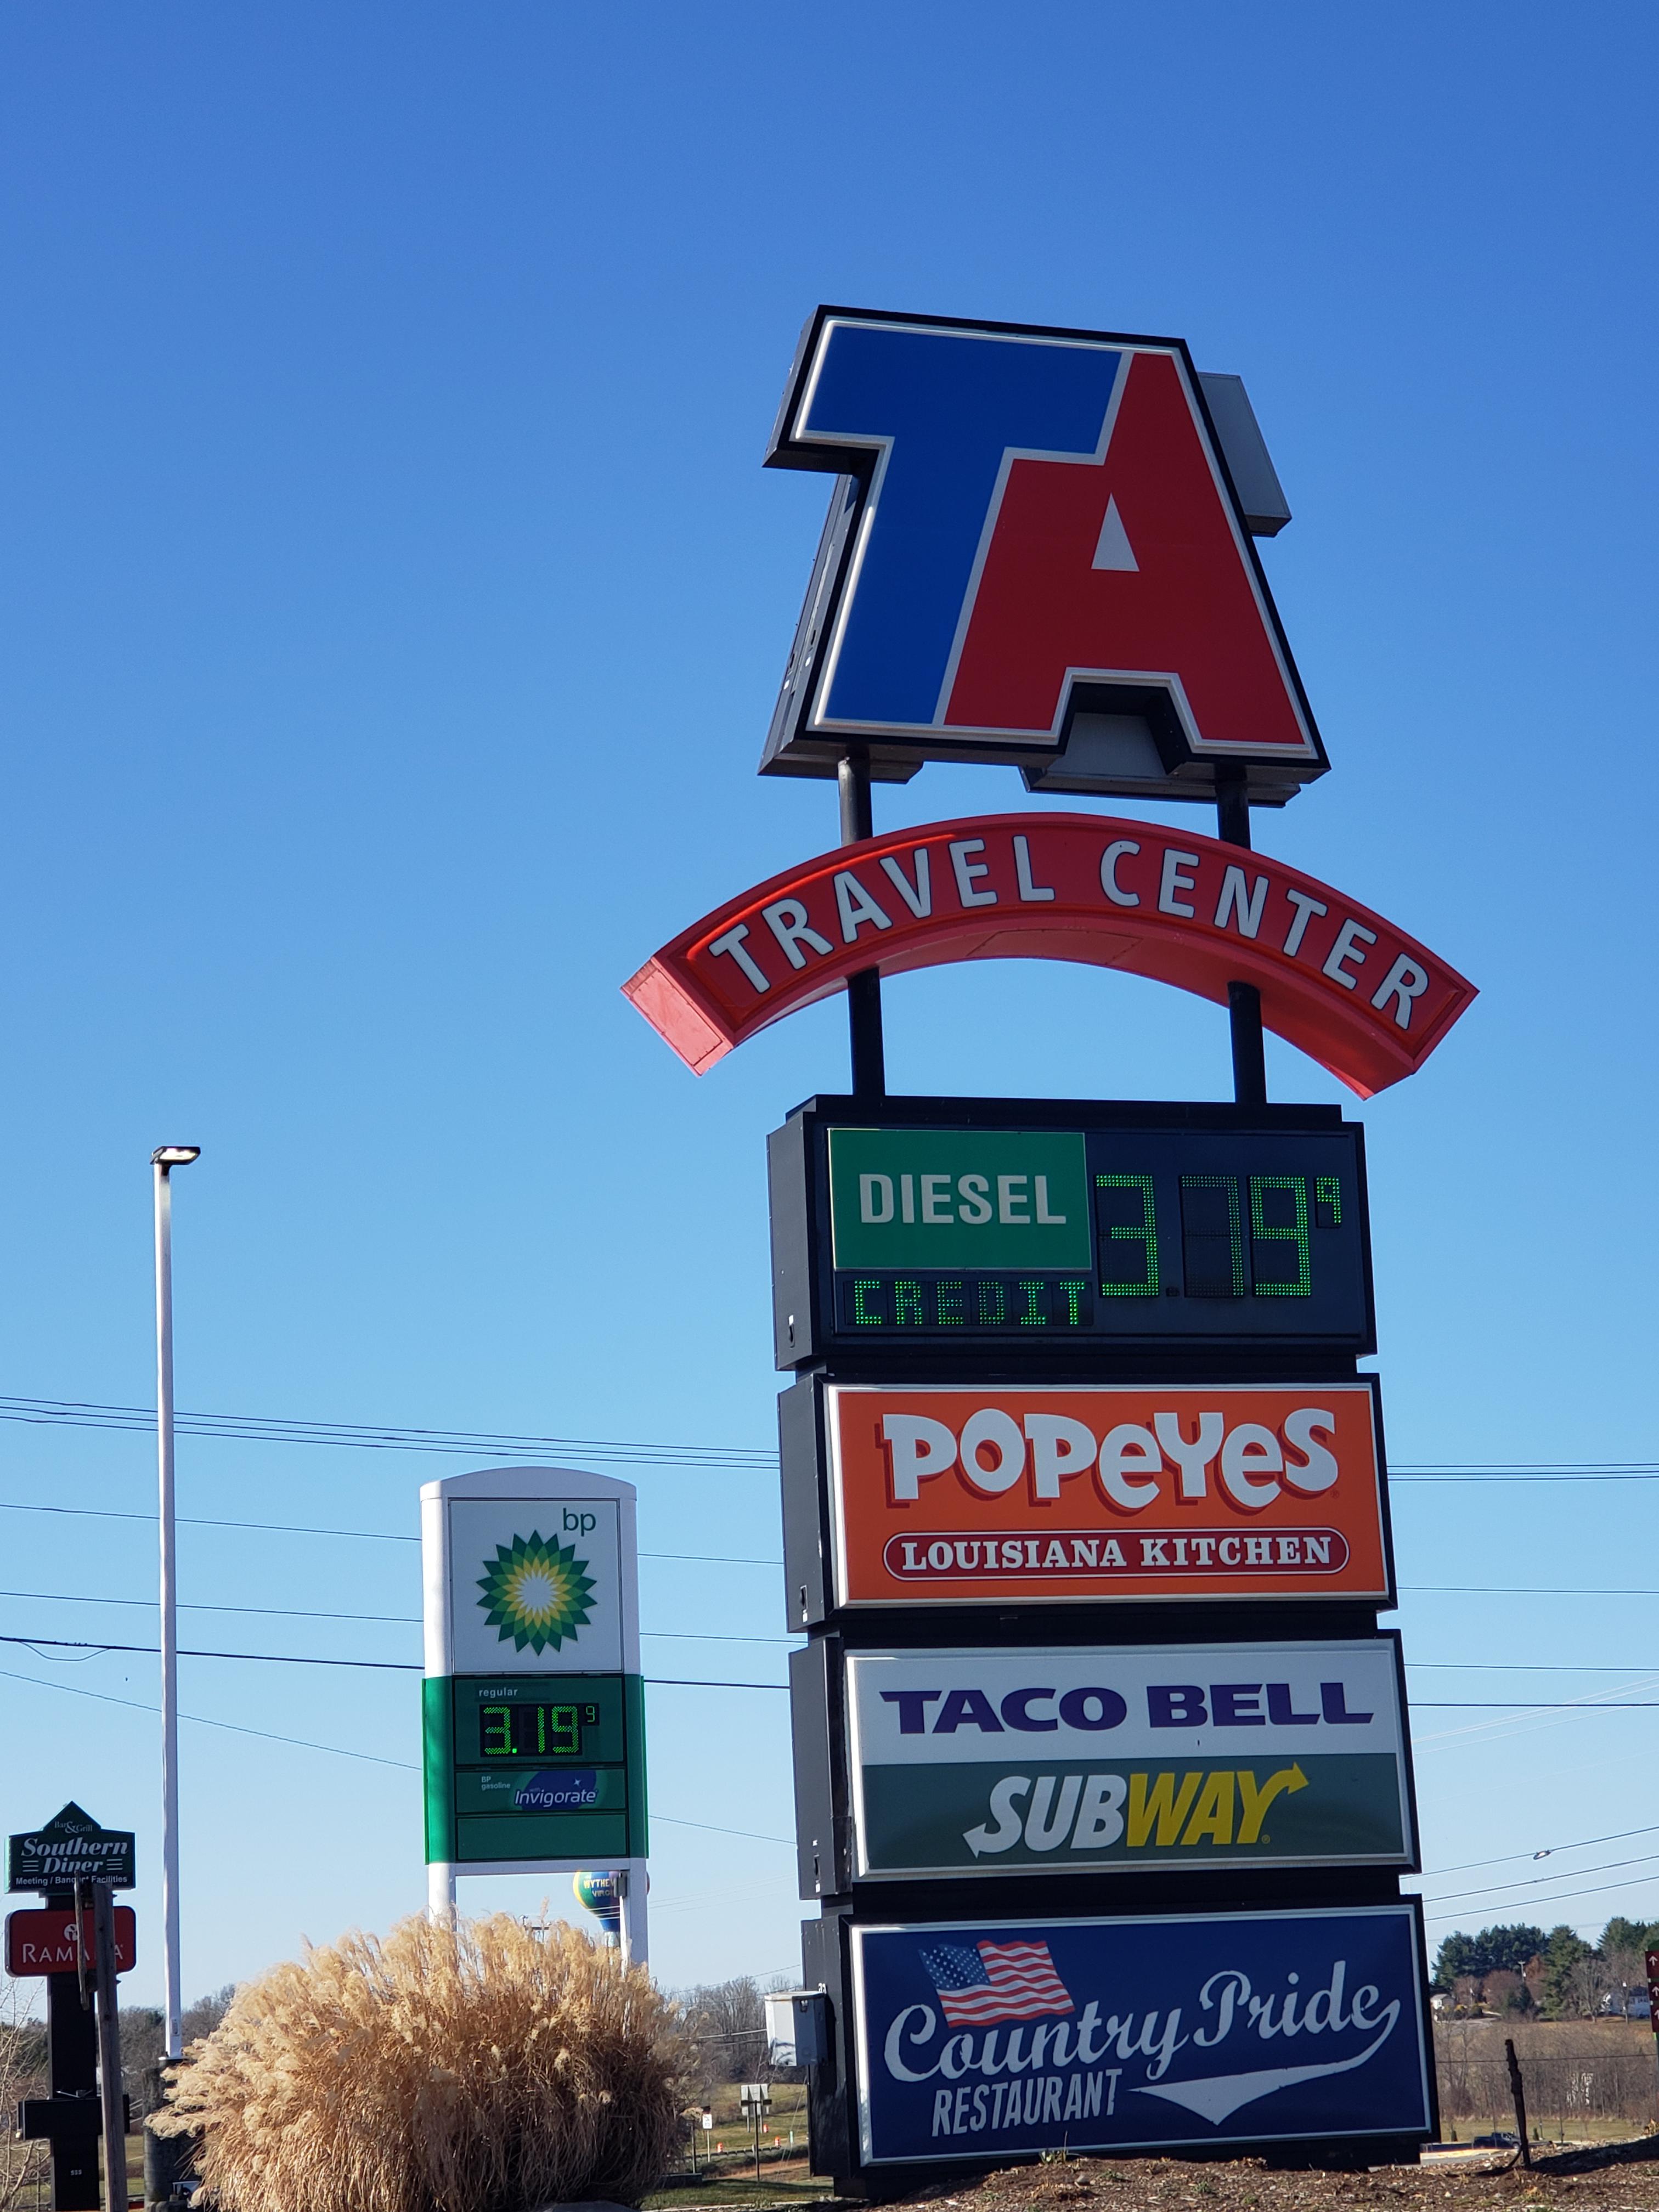 TravelCenters of America Travel Stores offer convenient, one-stop shopping with prices as low as, or lower, than our competition.